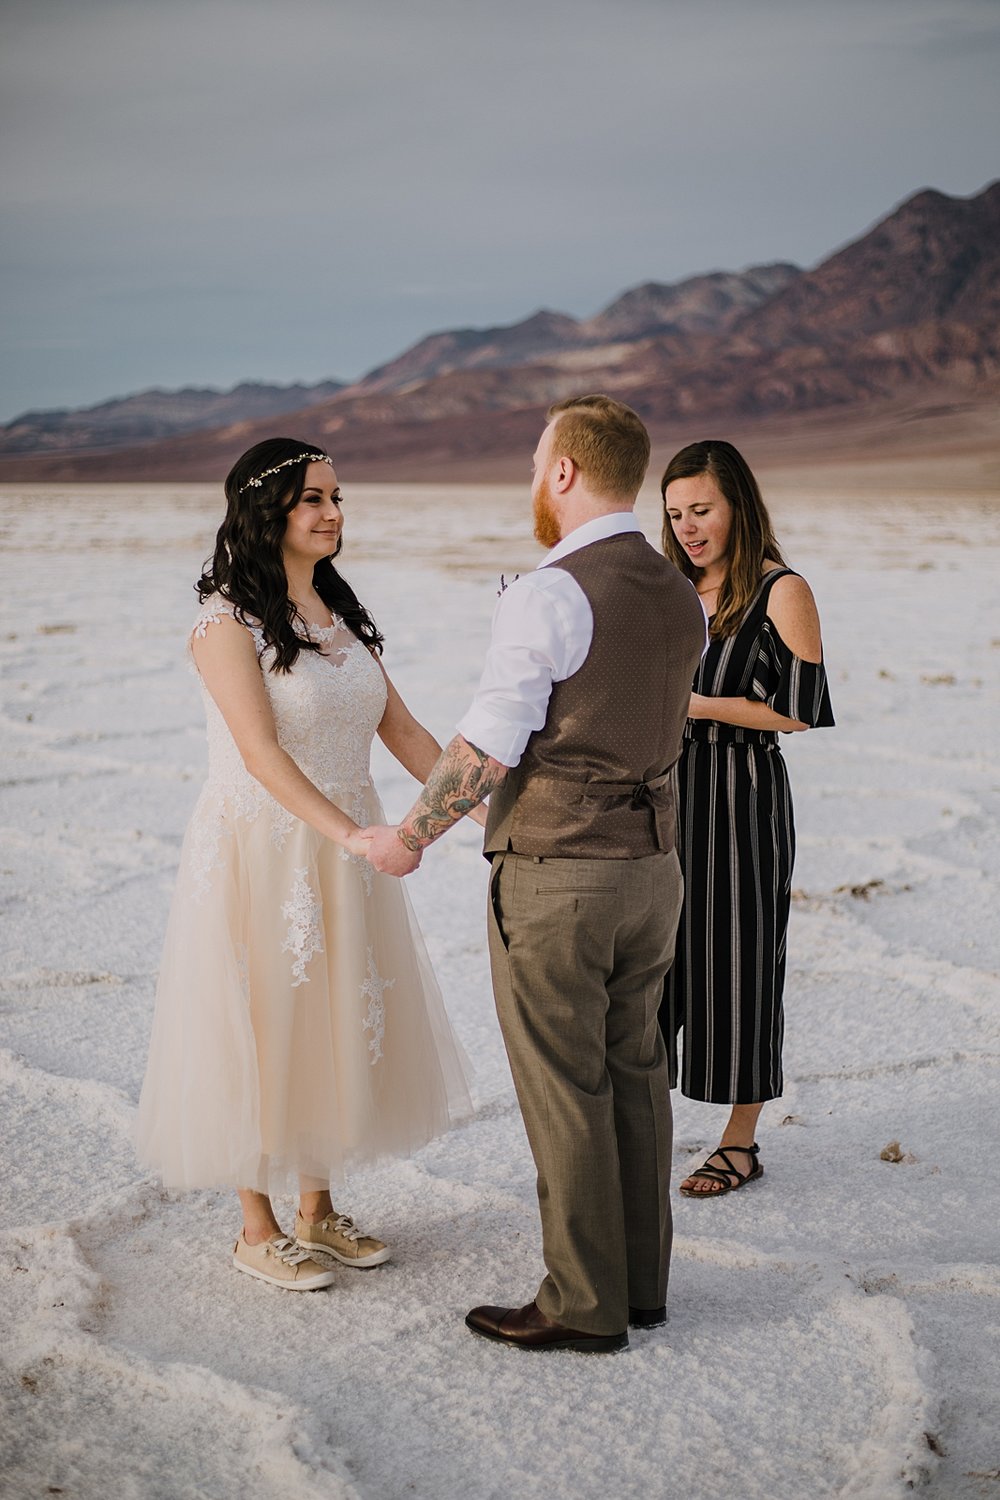 elopement on the salt flats, death valley national park elopement, elope in death valley, badwater basin elopement, hiking in death valley national park, sunset at badwater basin